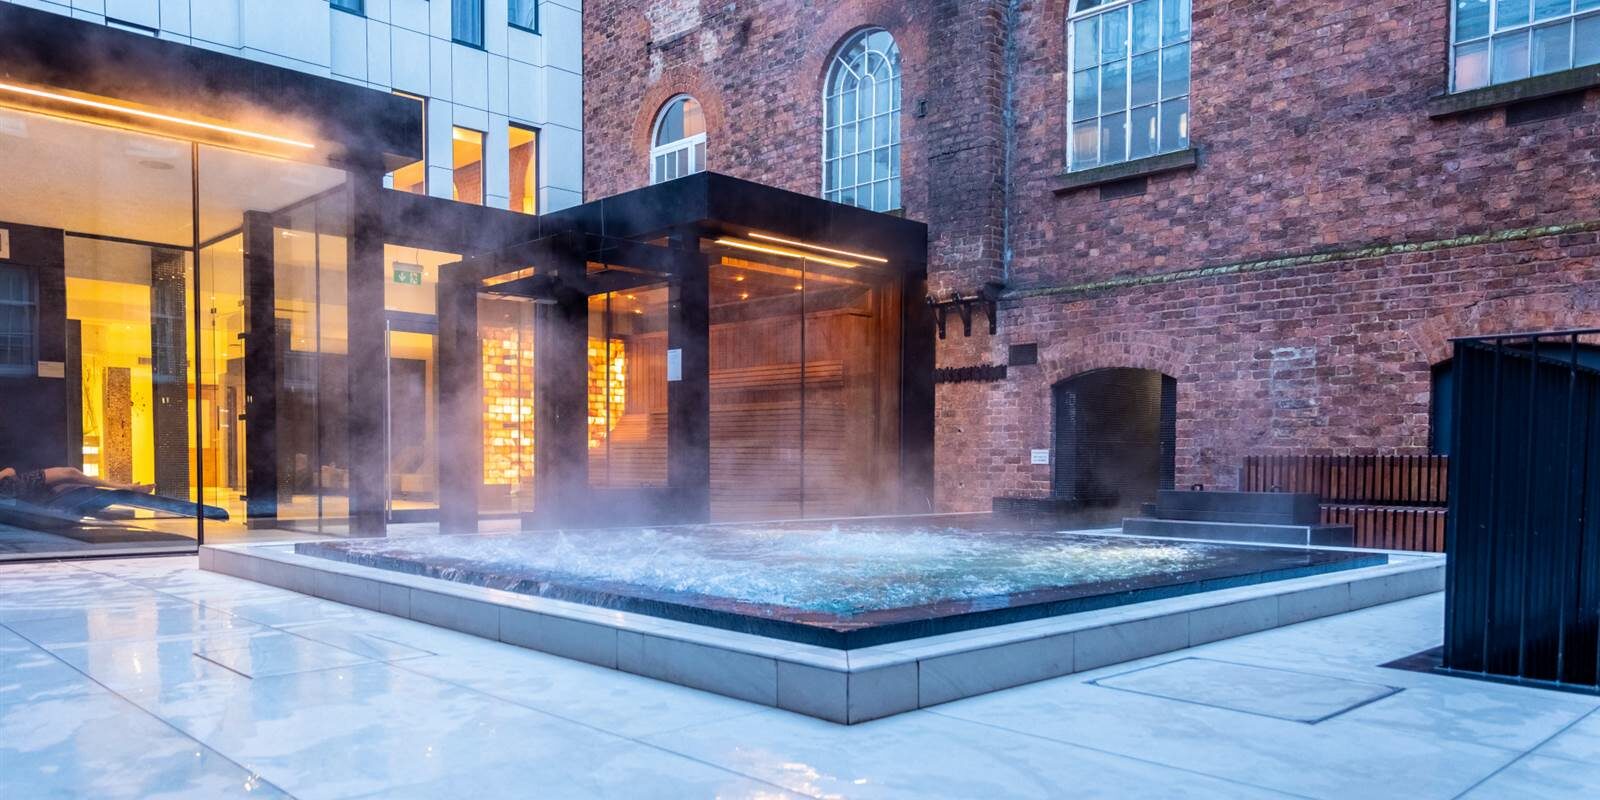 Relax this Valentine's Day at Hope Street Hotel Spa